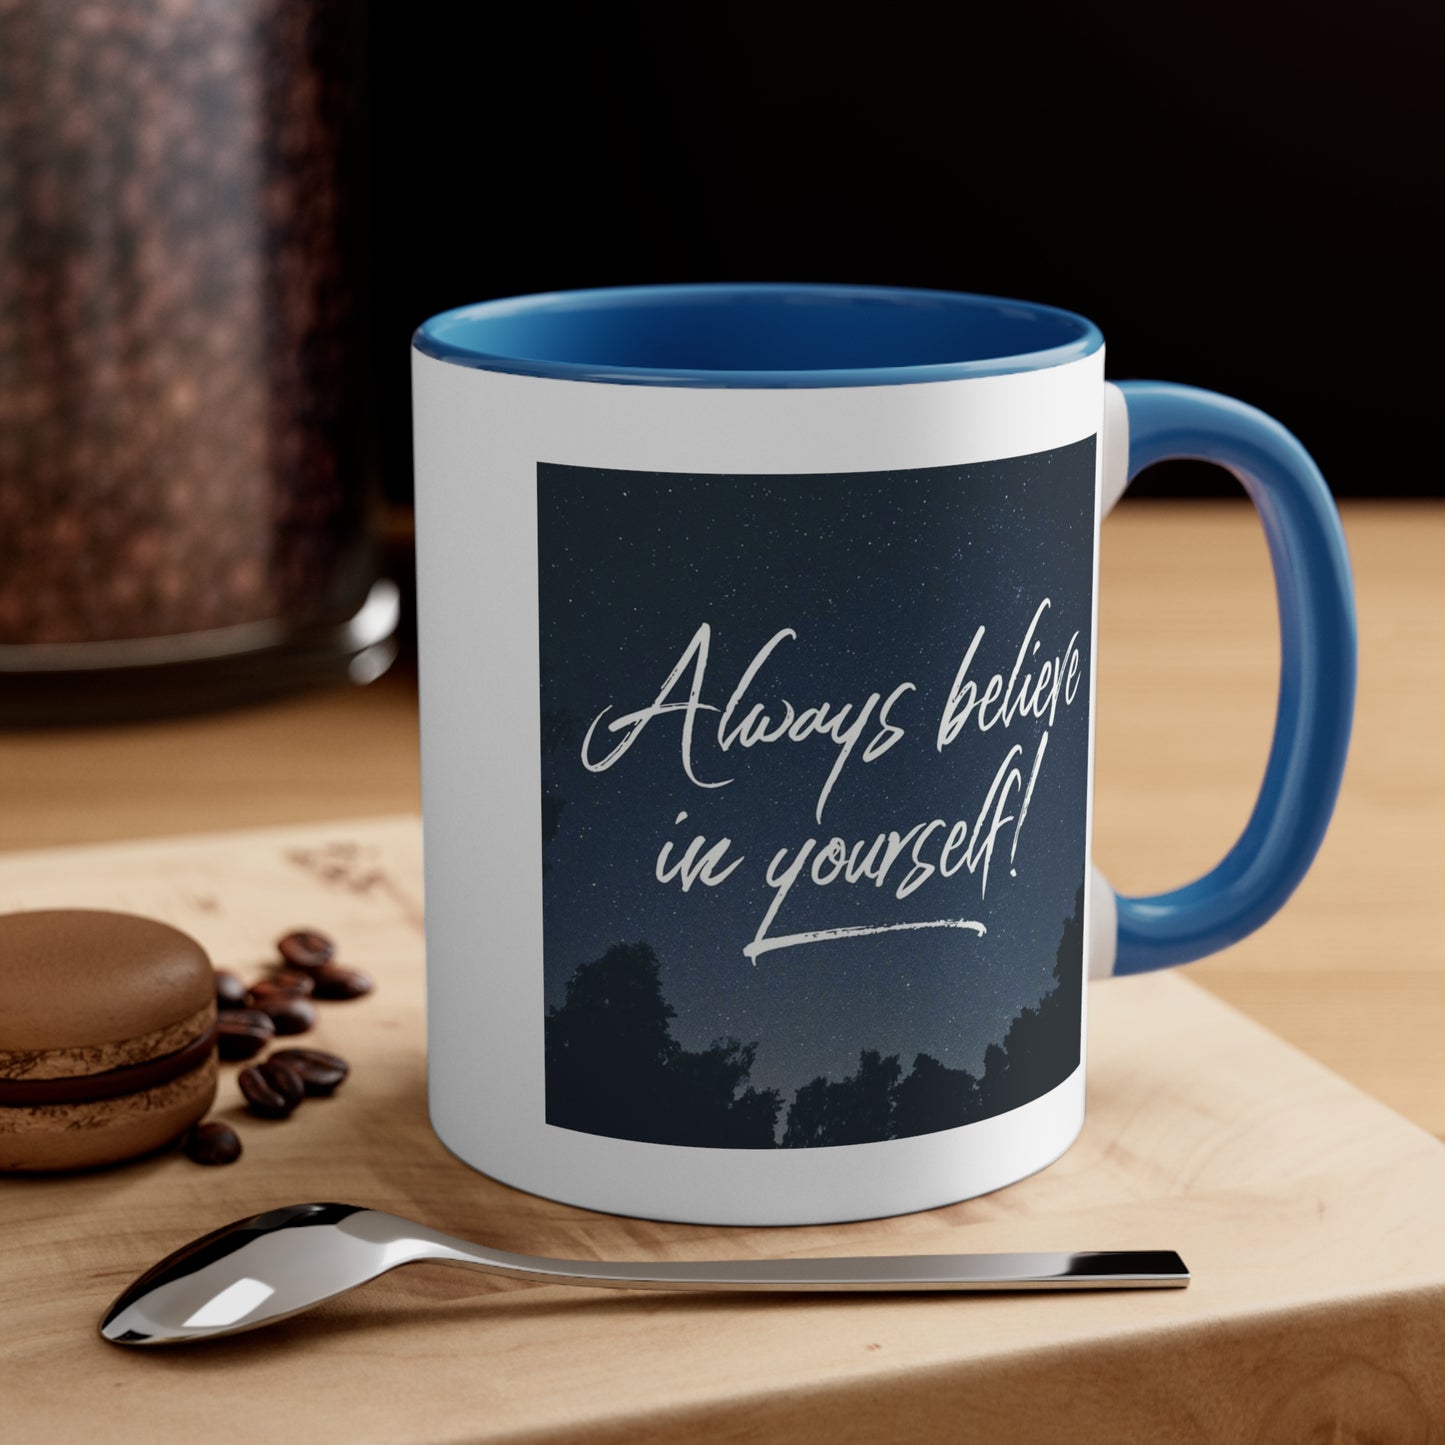 Believe in Yourself! Accent Coffee Mug, 11oz